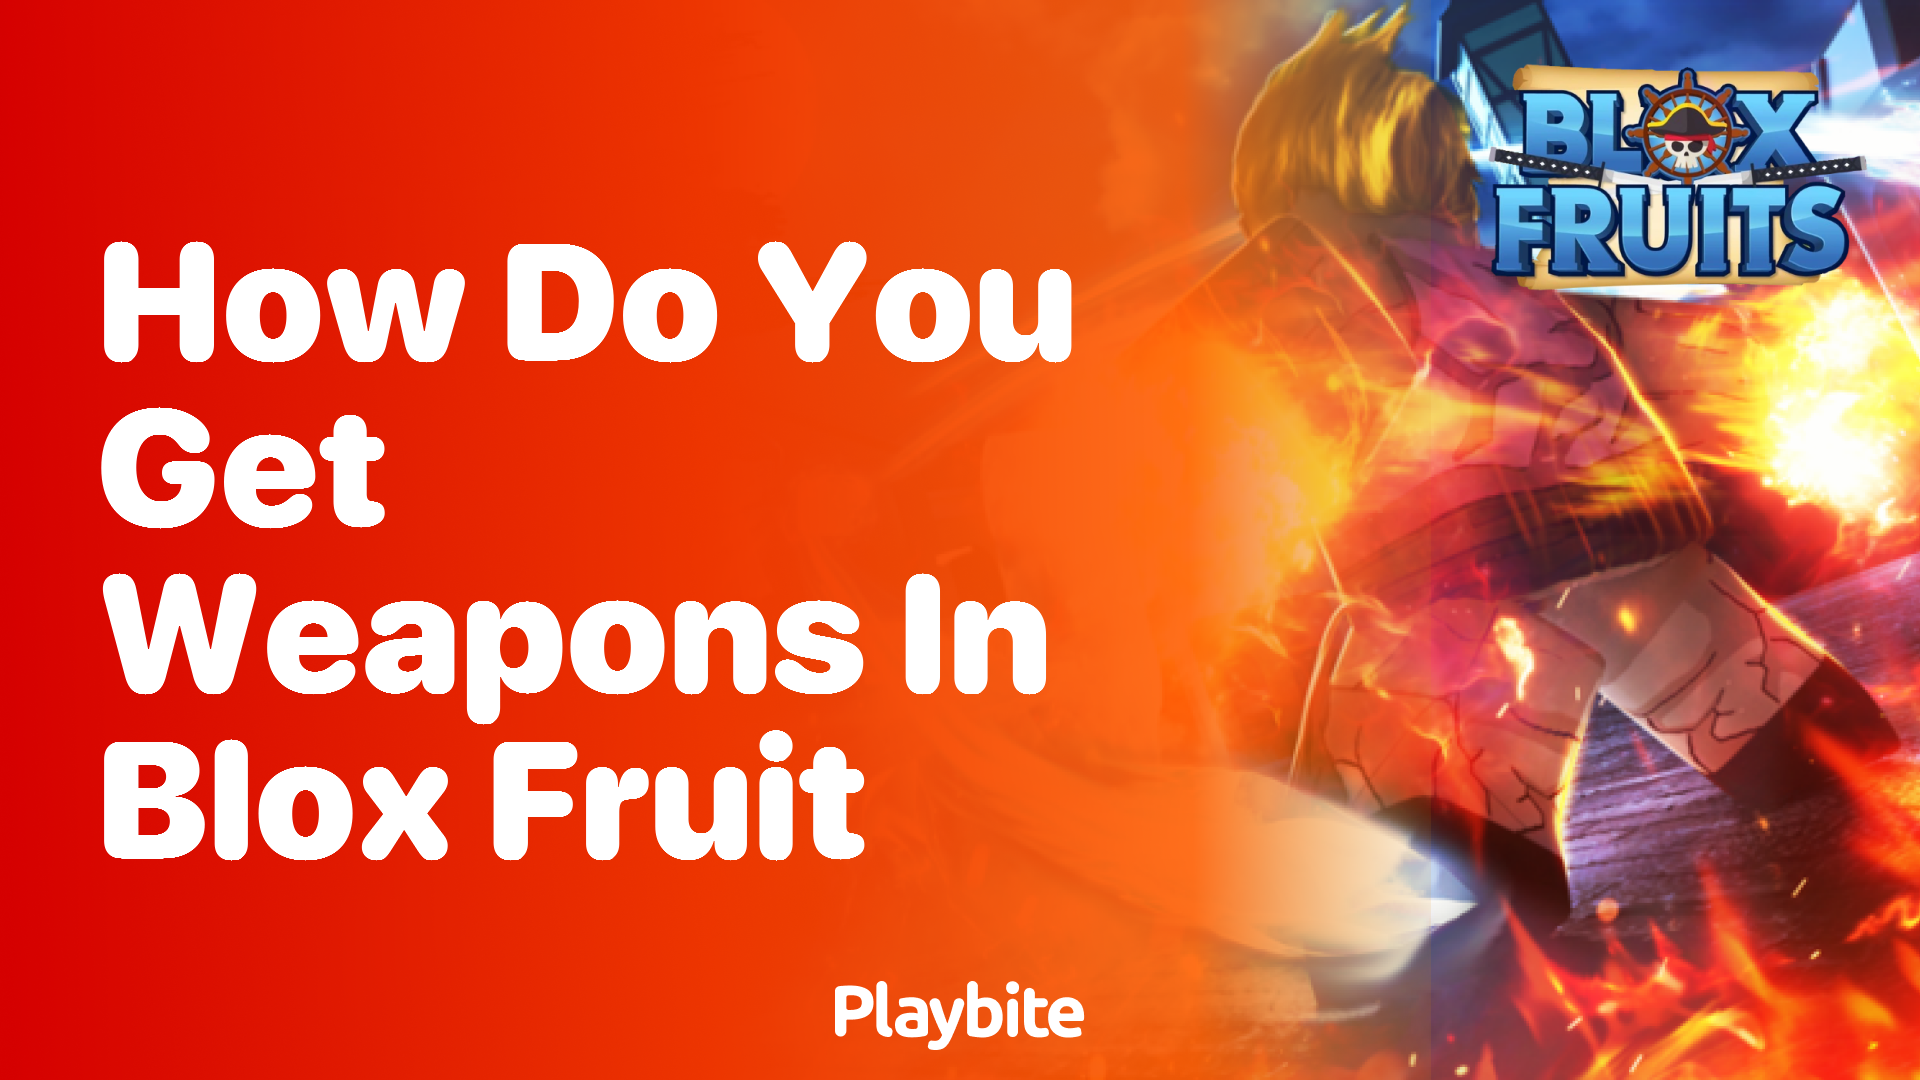 How Do You Get Weapons in Blox Fruit?